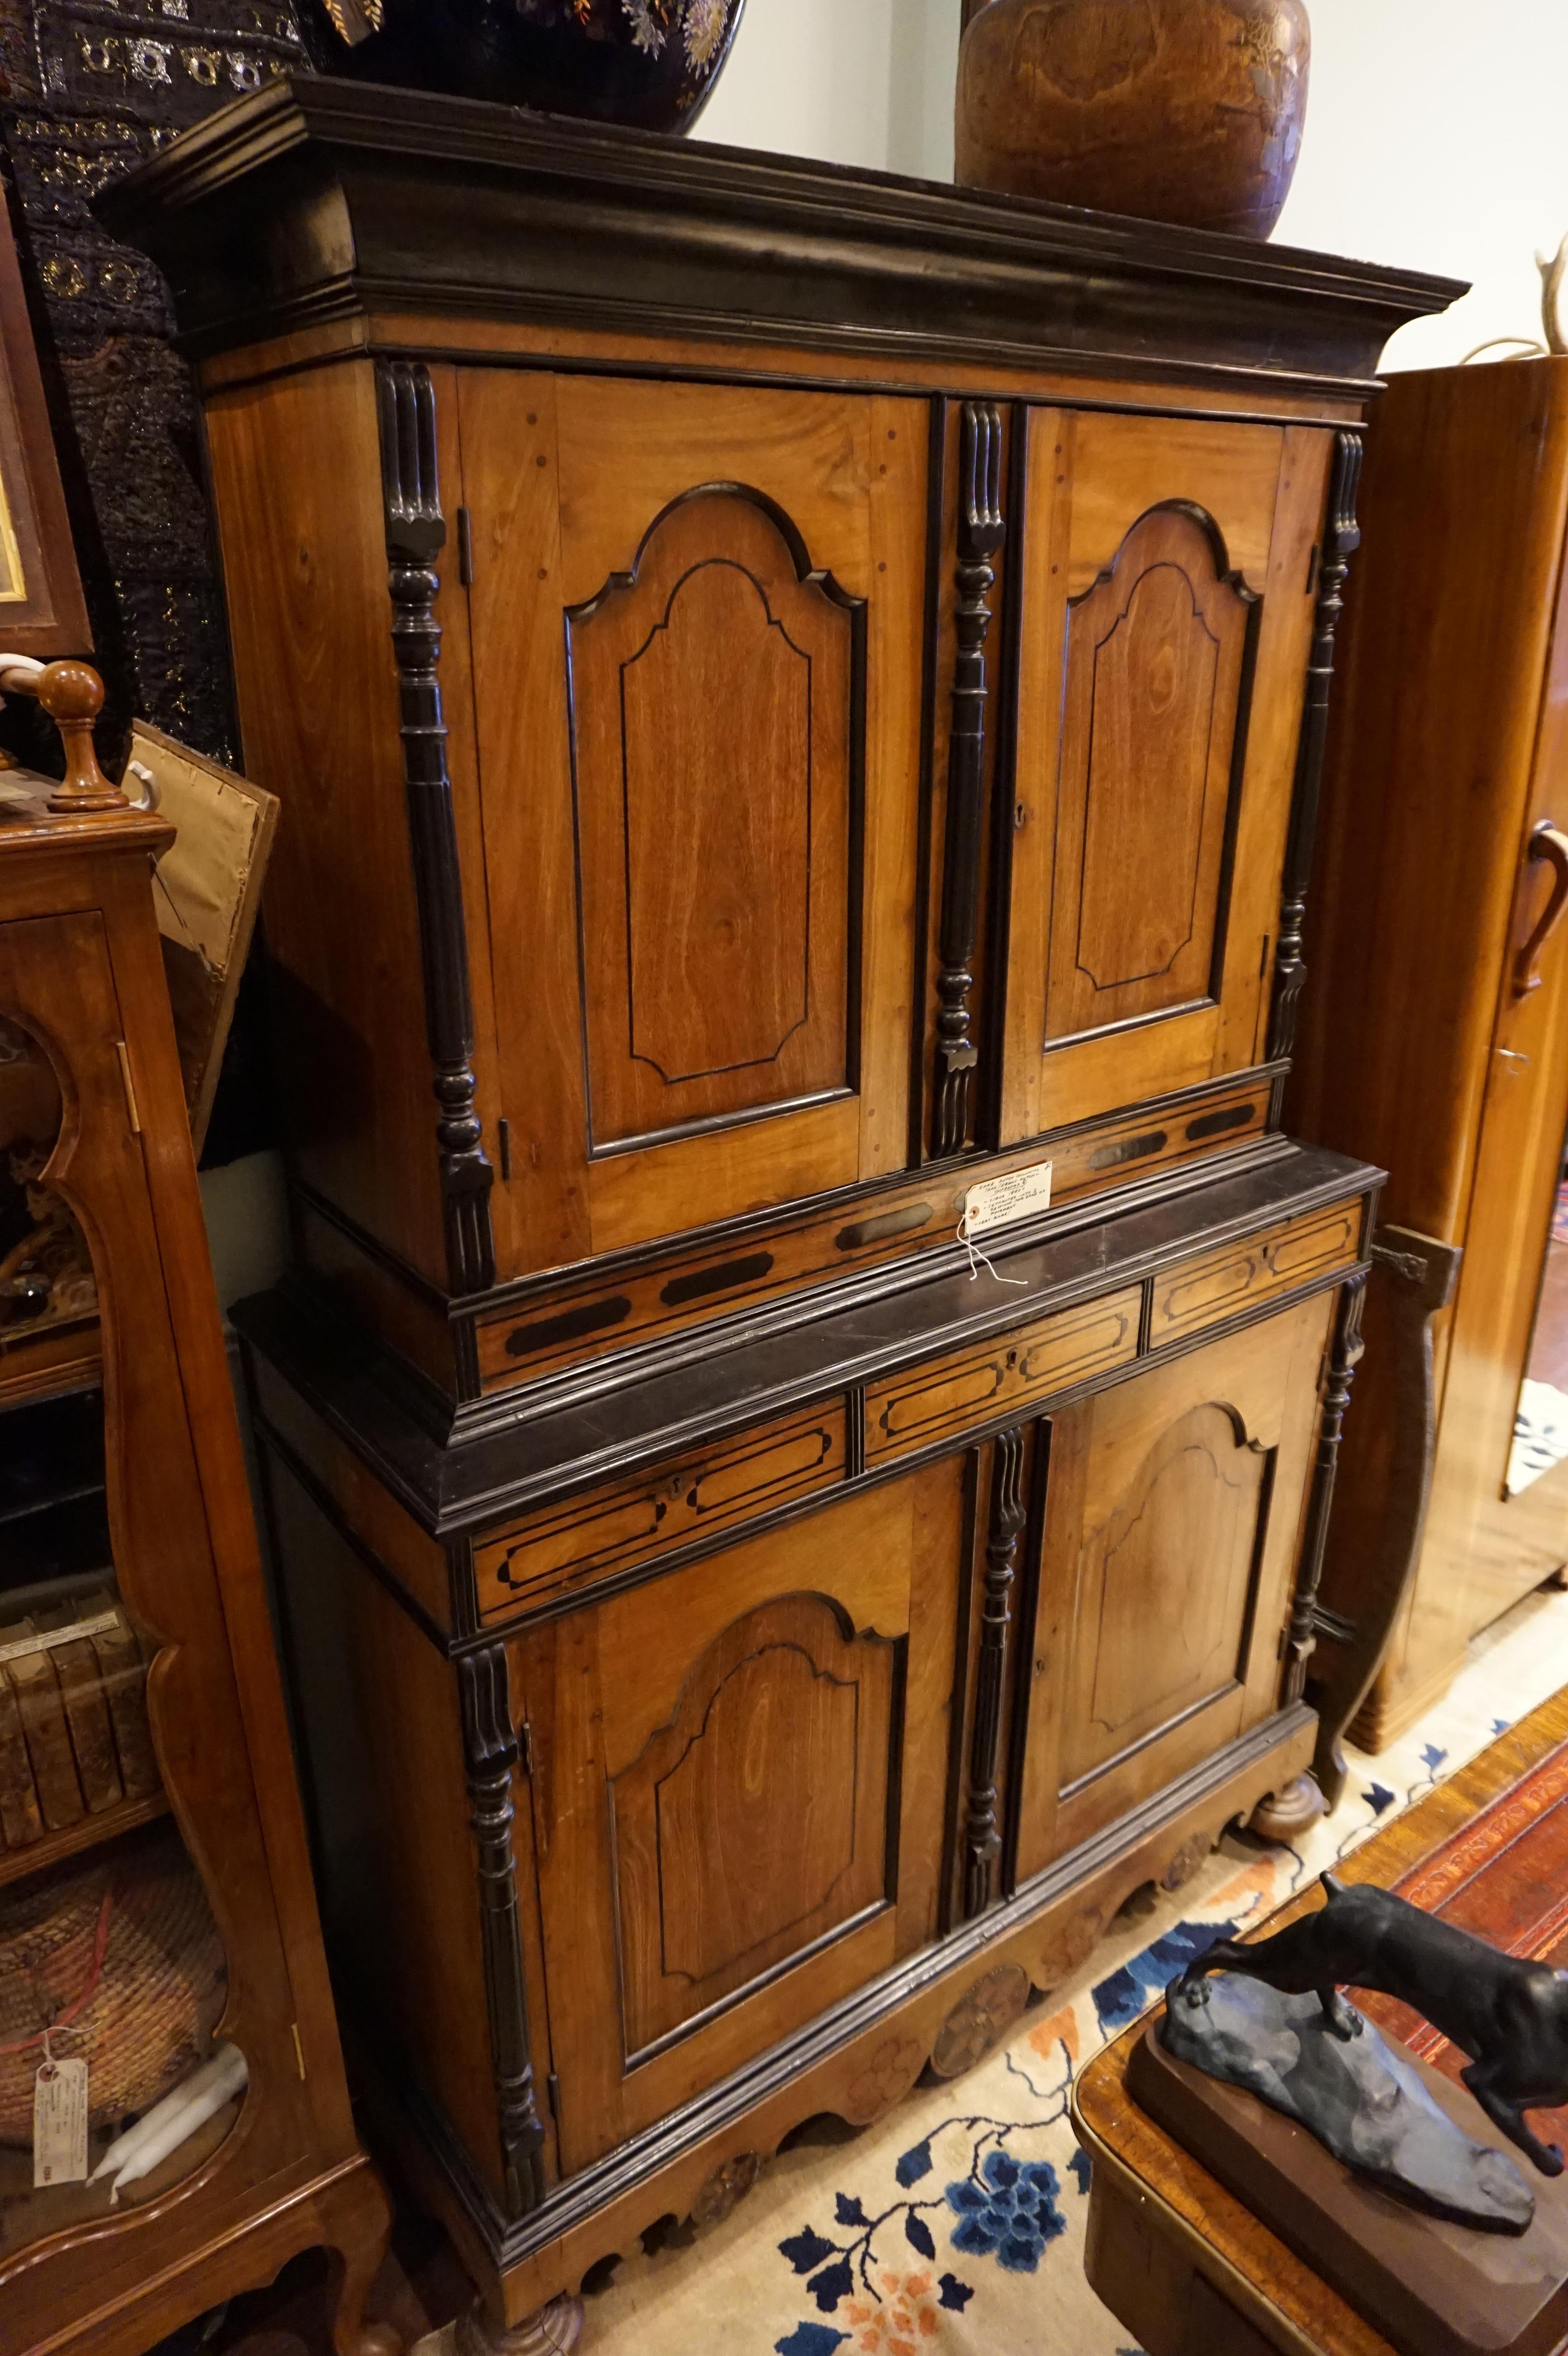 Exquisite Dutch Colonial cupboard hand-made from solid Teak and laced with Ebony. This piece dismantles into three pieces for ease of movement and exudes the elegance of bygone craftsmanship with fluted pilasters and crown mouldings in ebony